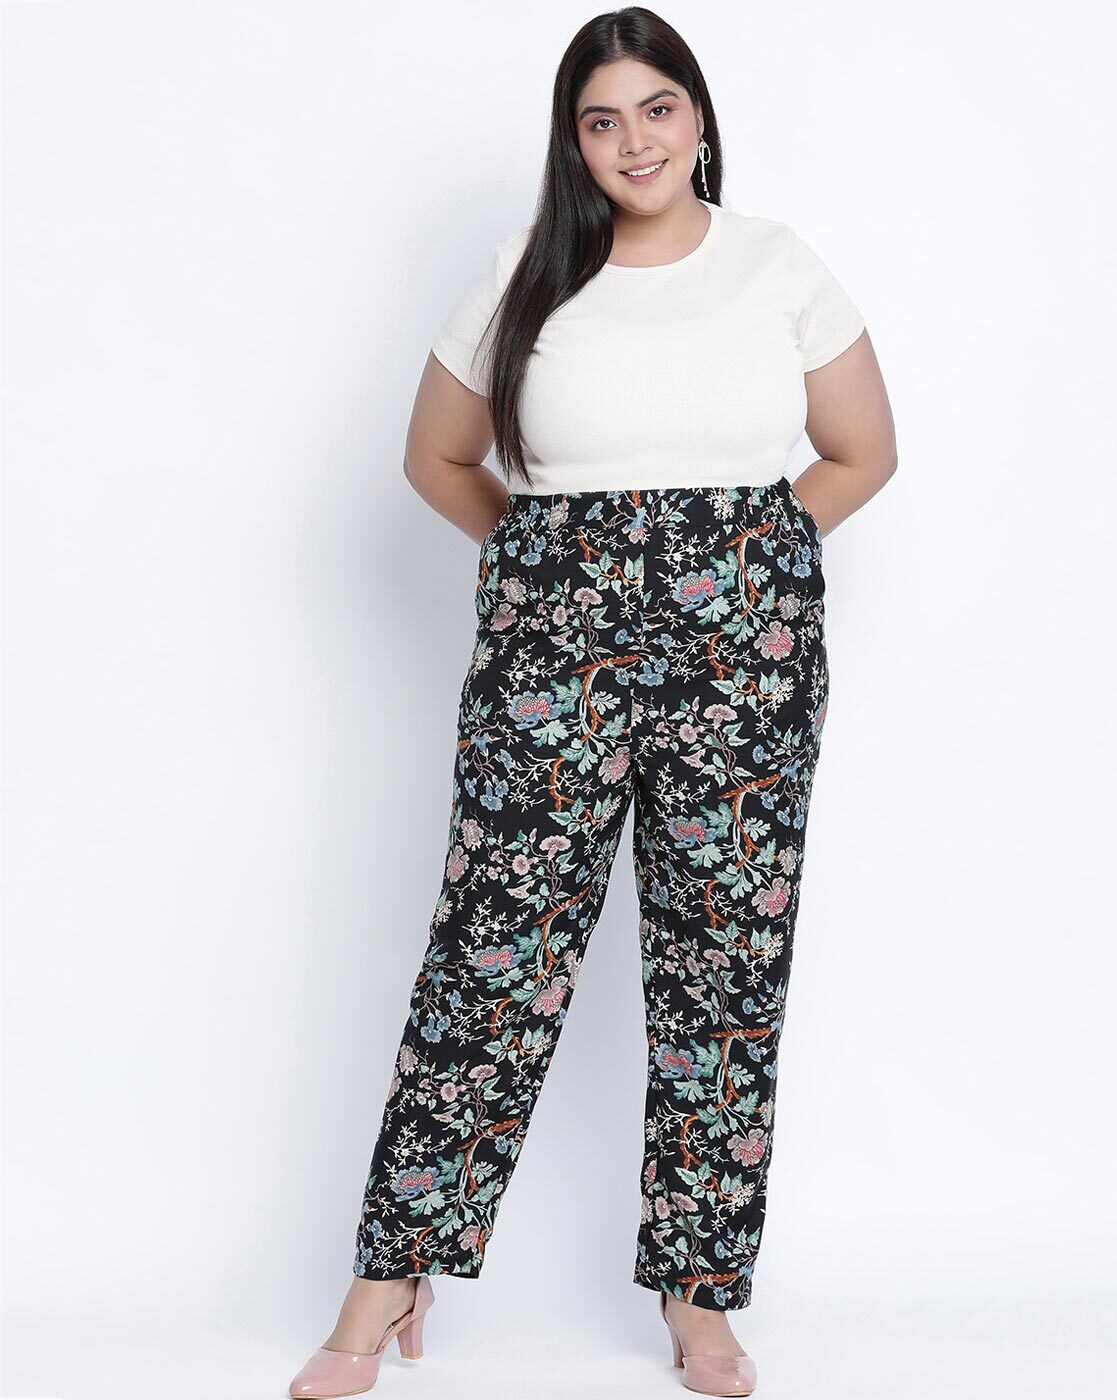 Floral Pants with Monochrome Tops